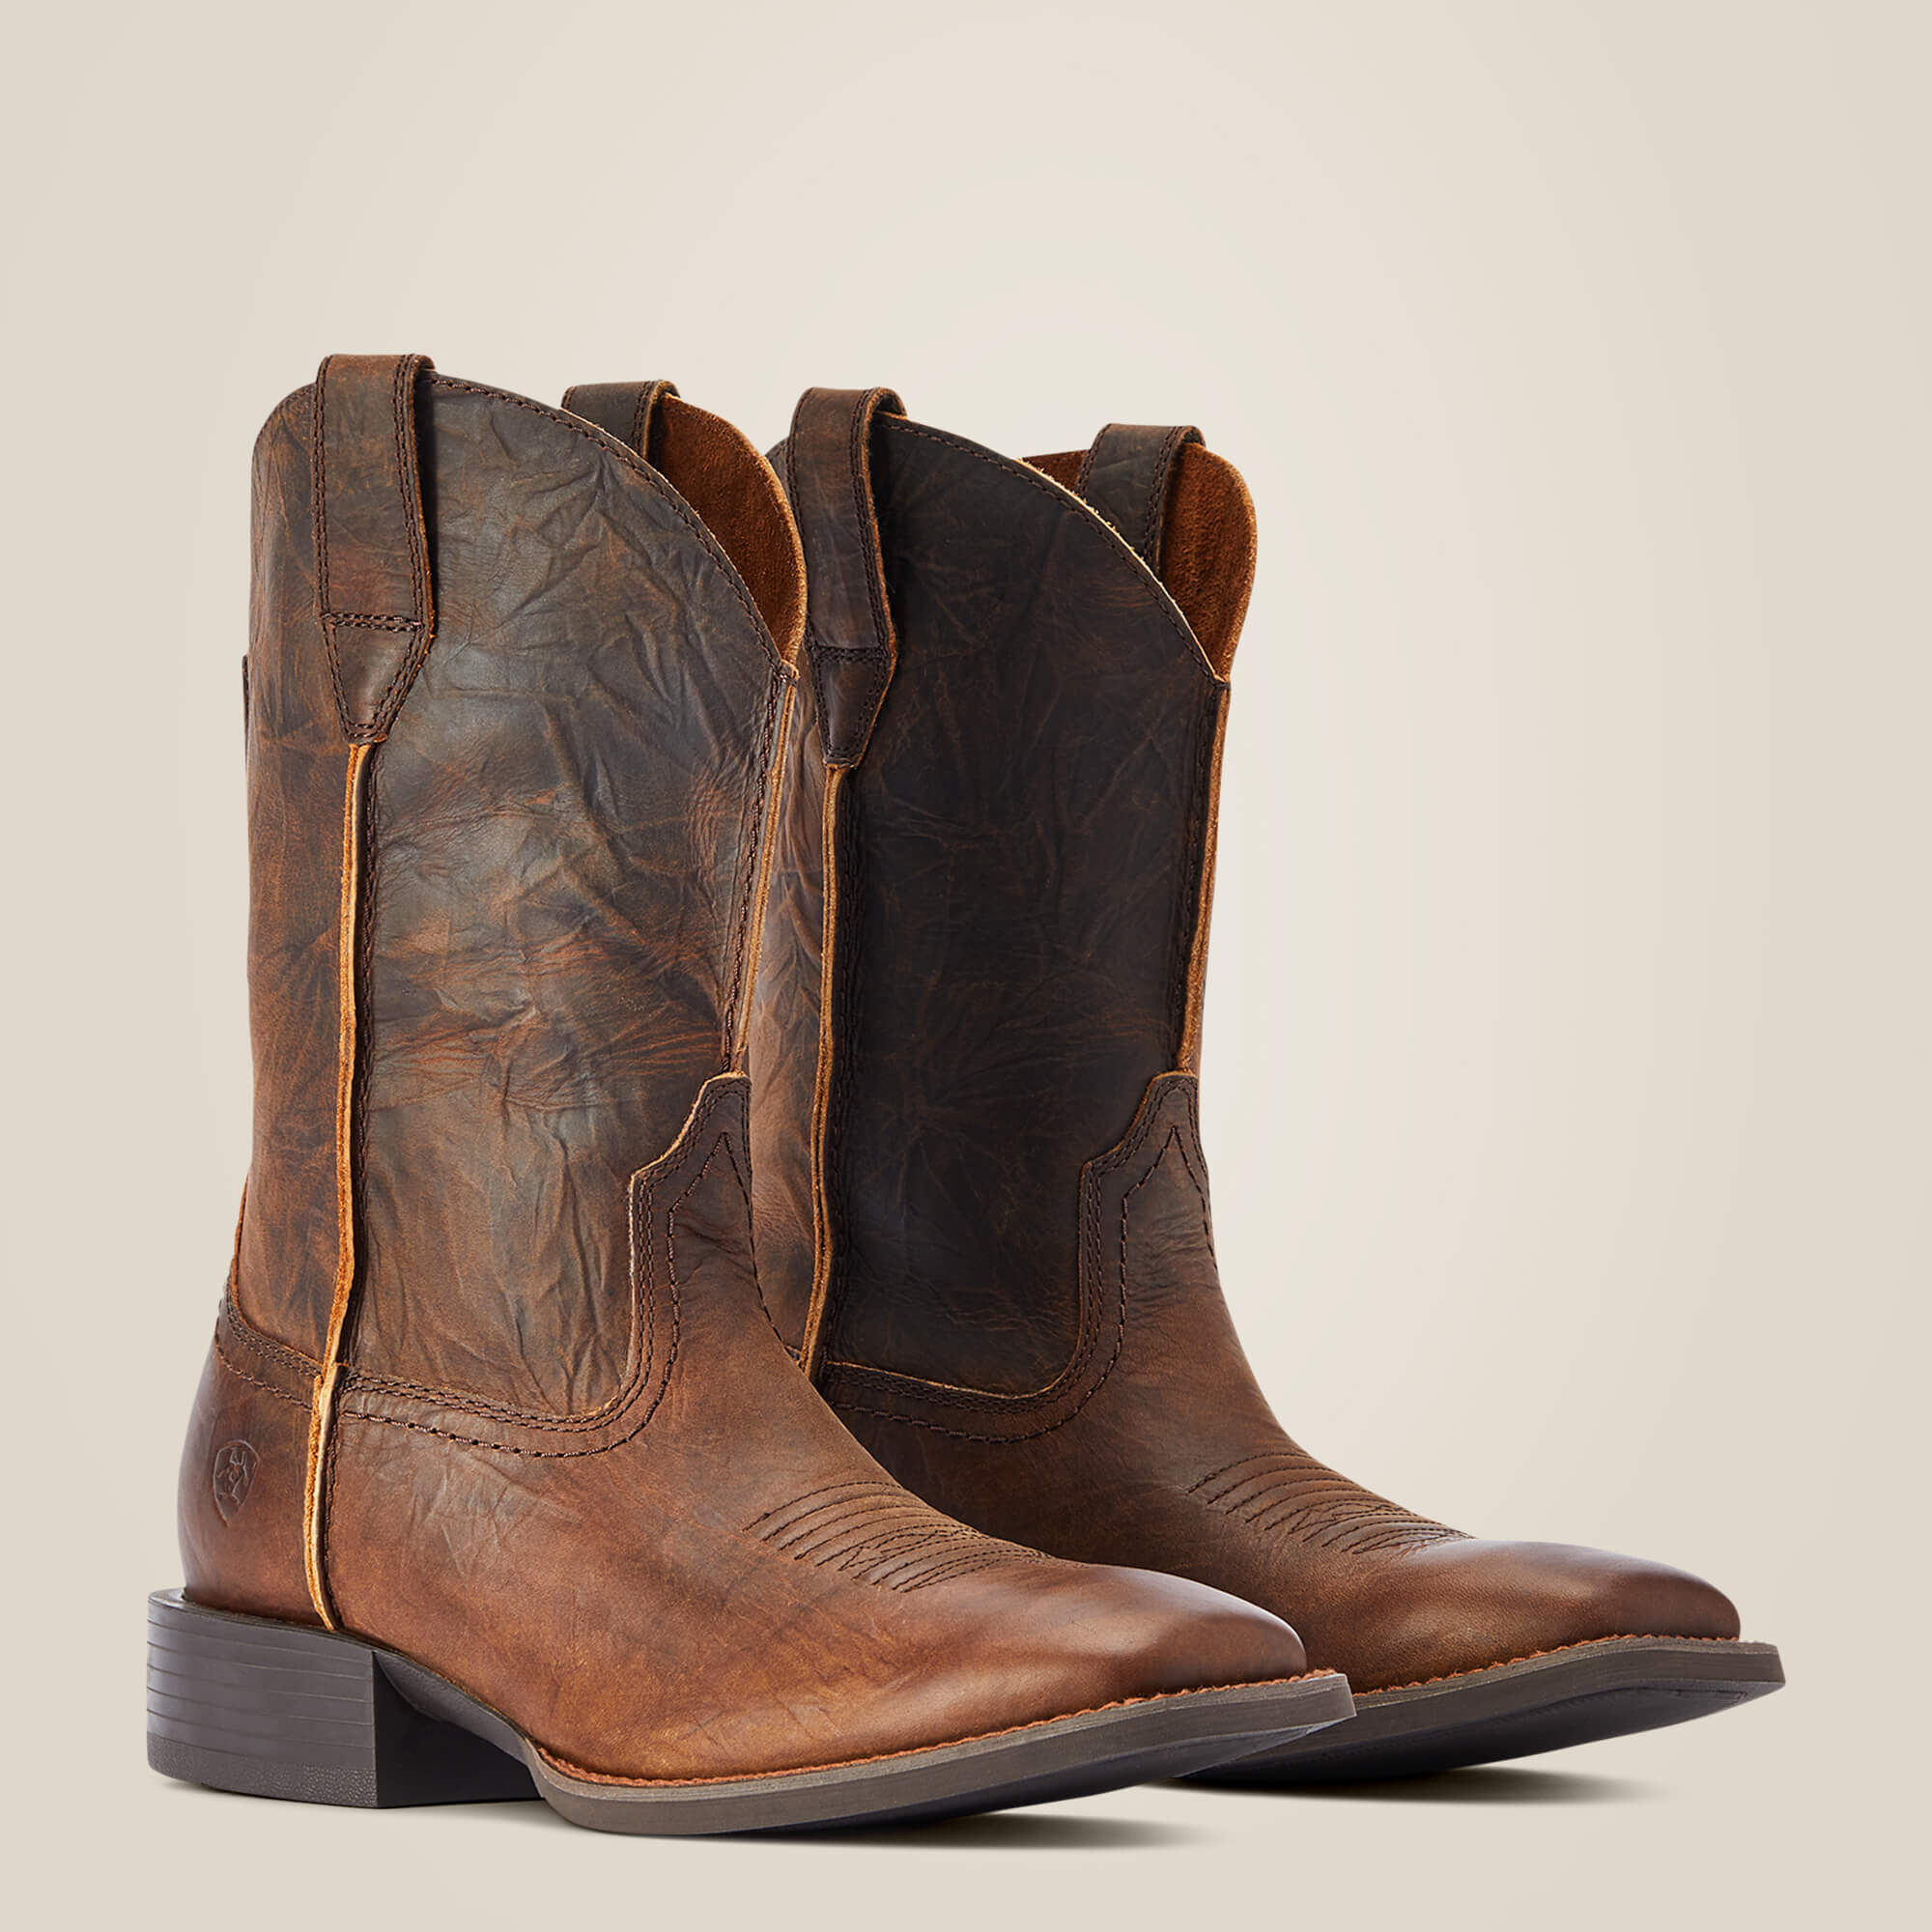 Men's Sport Rambler Western Boots in Bartop Brown Leather, Size: 7.5 D /  Medium by Ariat